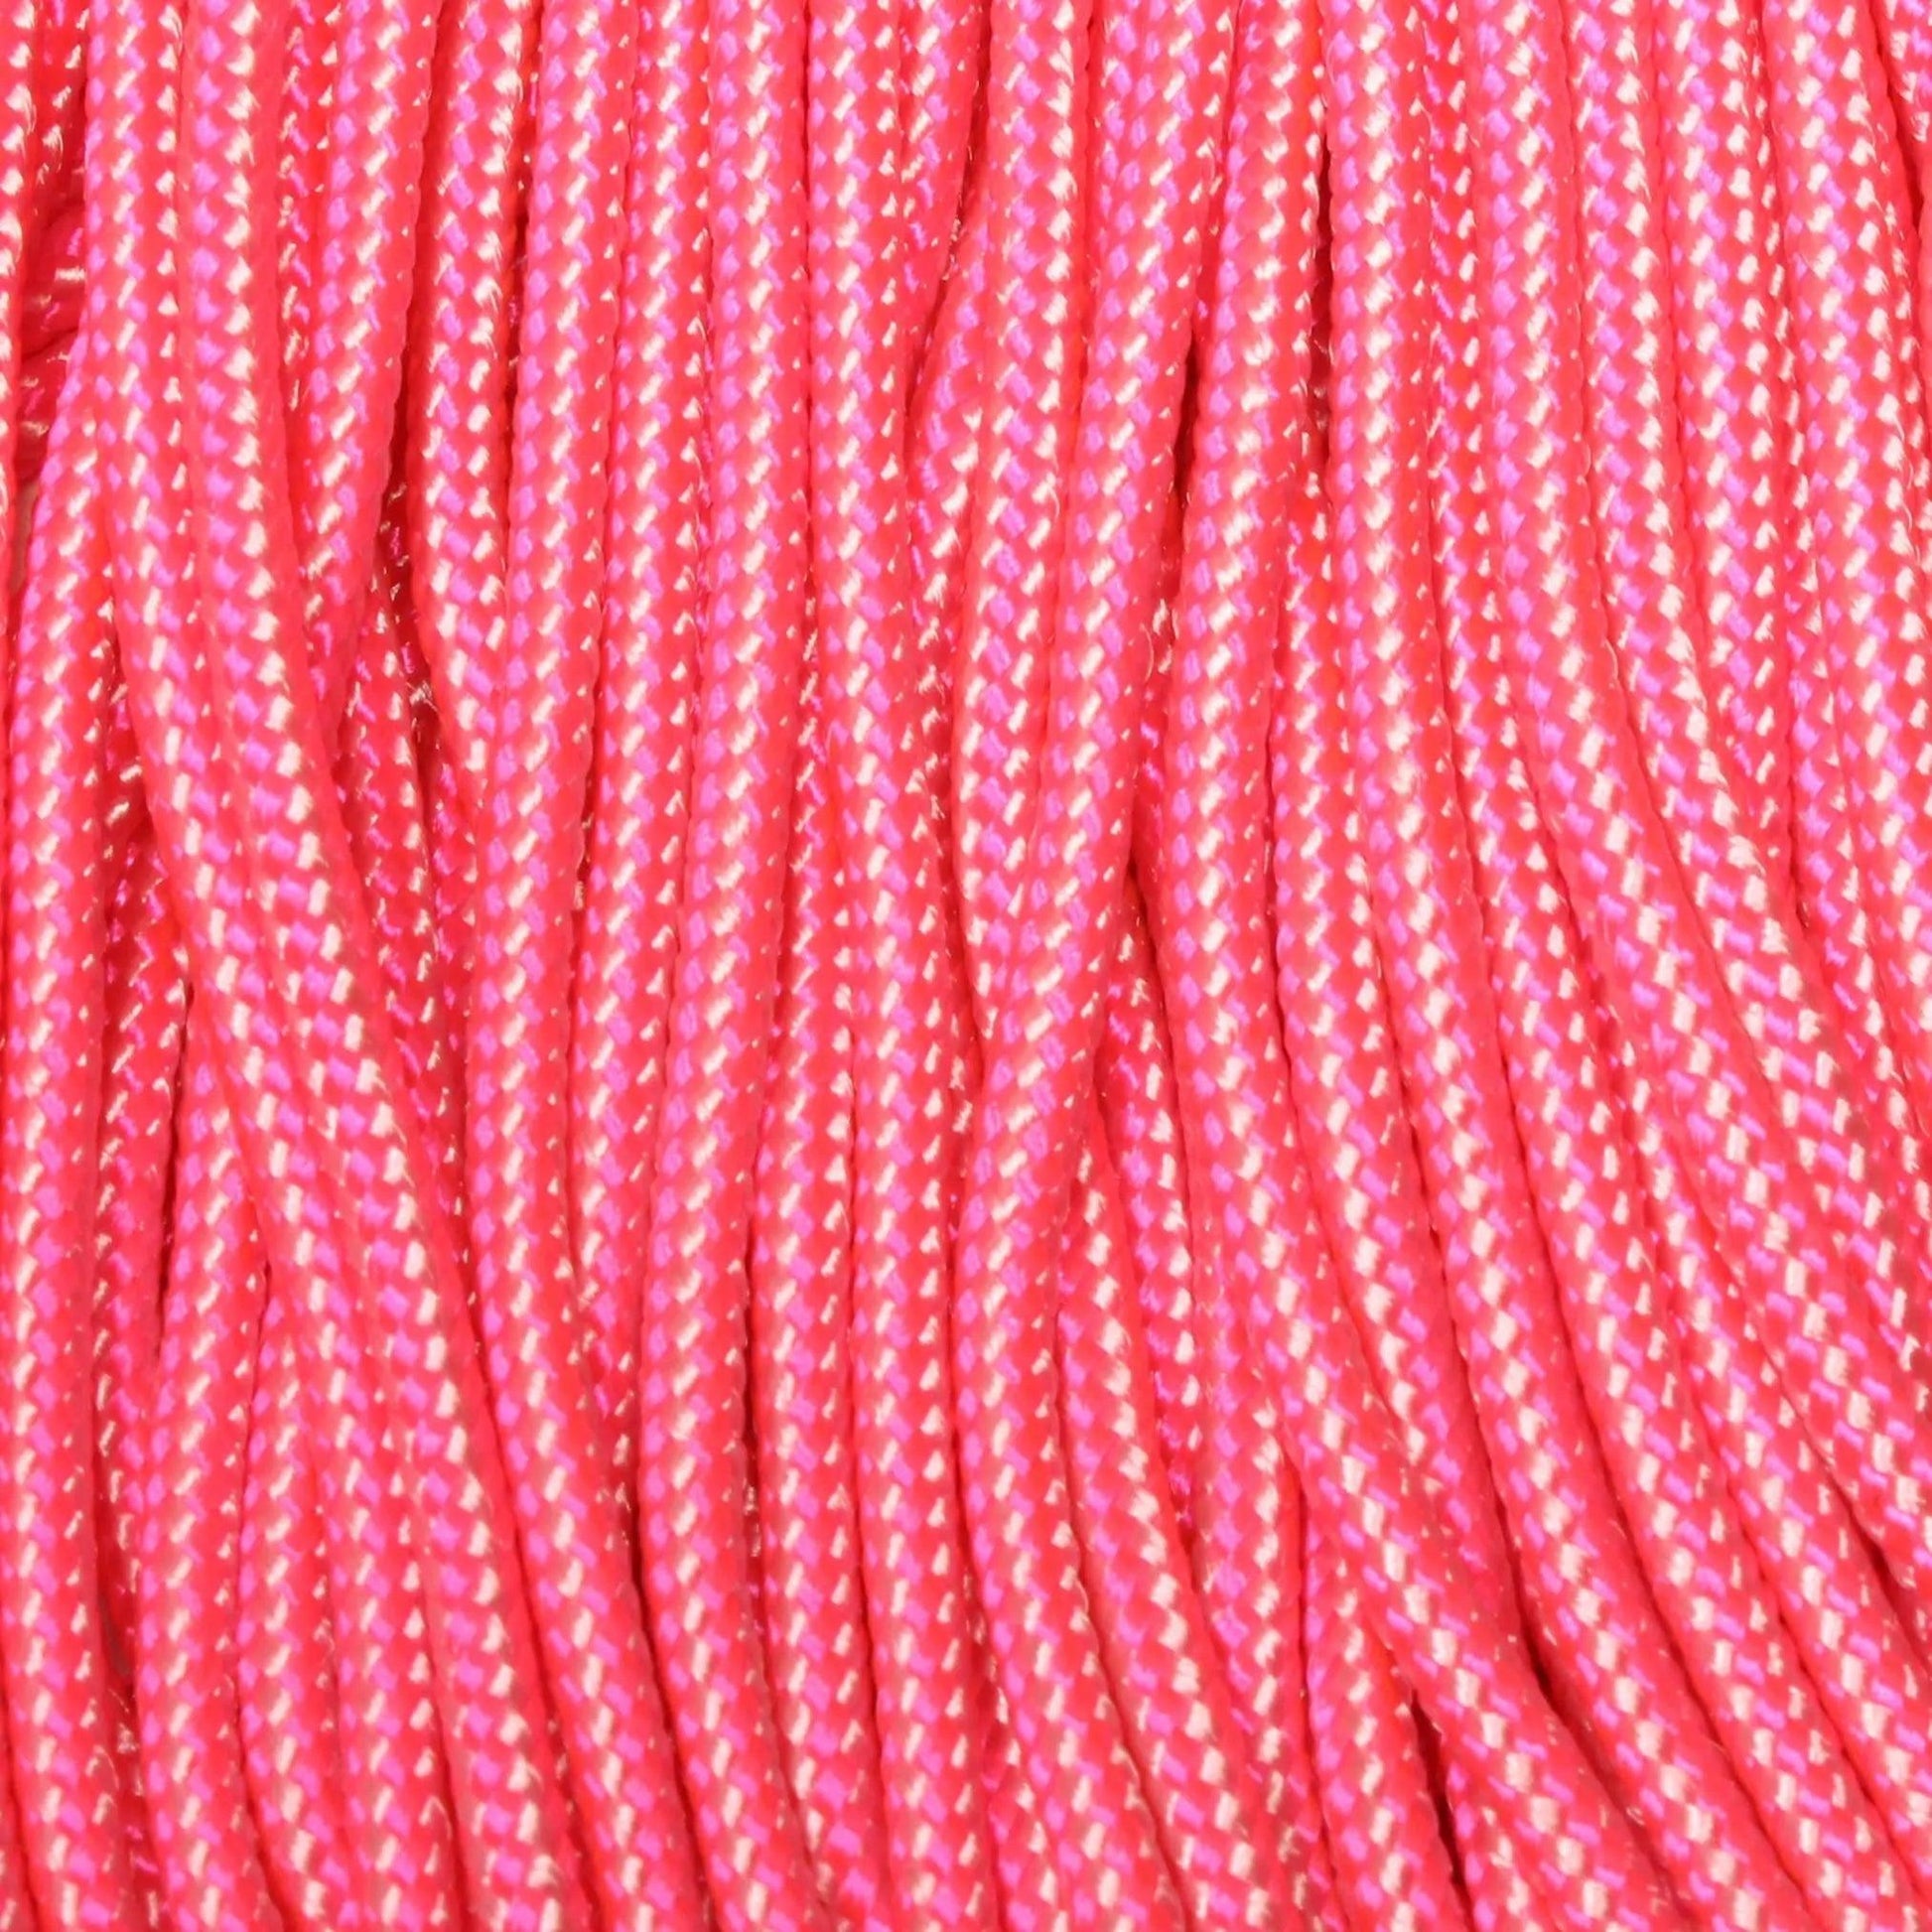 325-3 Paracord Candy Made in the USA (100 FT.)  163- nylon/nylon paracord